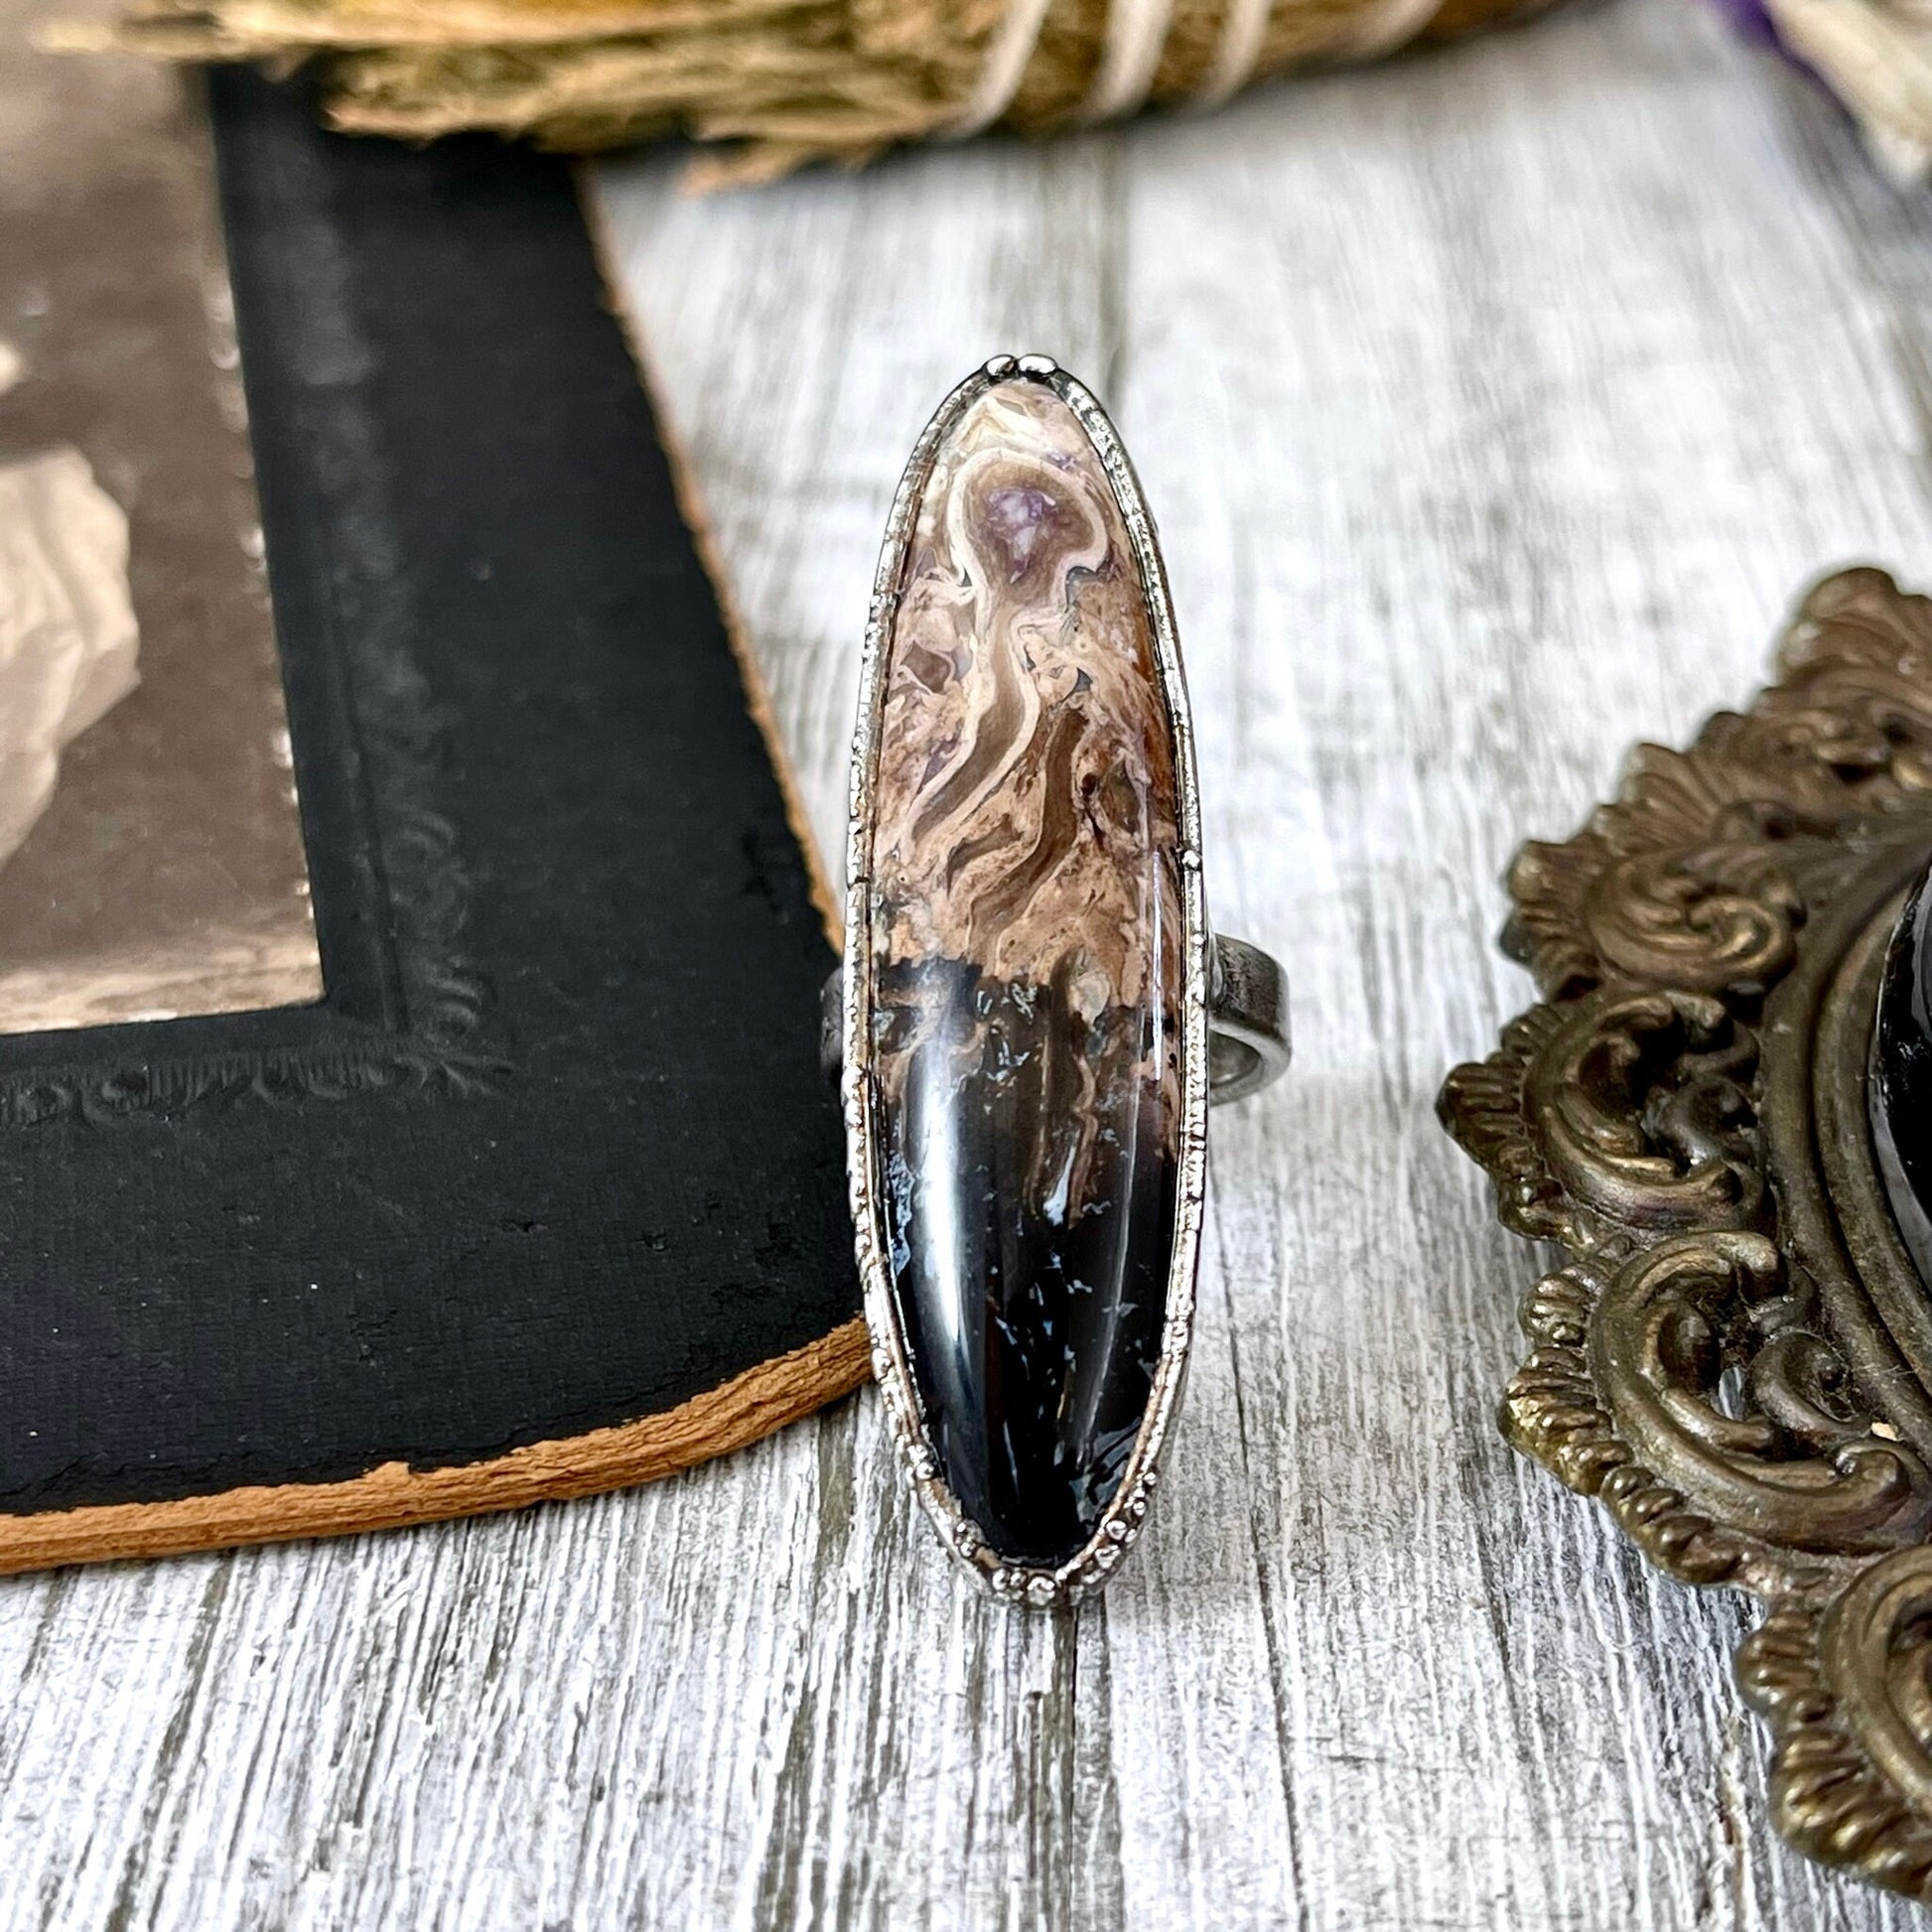 Unique Size 6.5 Large Fossilized Palm Root Statement Ring in Fine Silver / Foxlark Collection - One of a Kind - Foxlark Crystal Jewelry